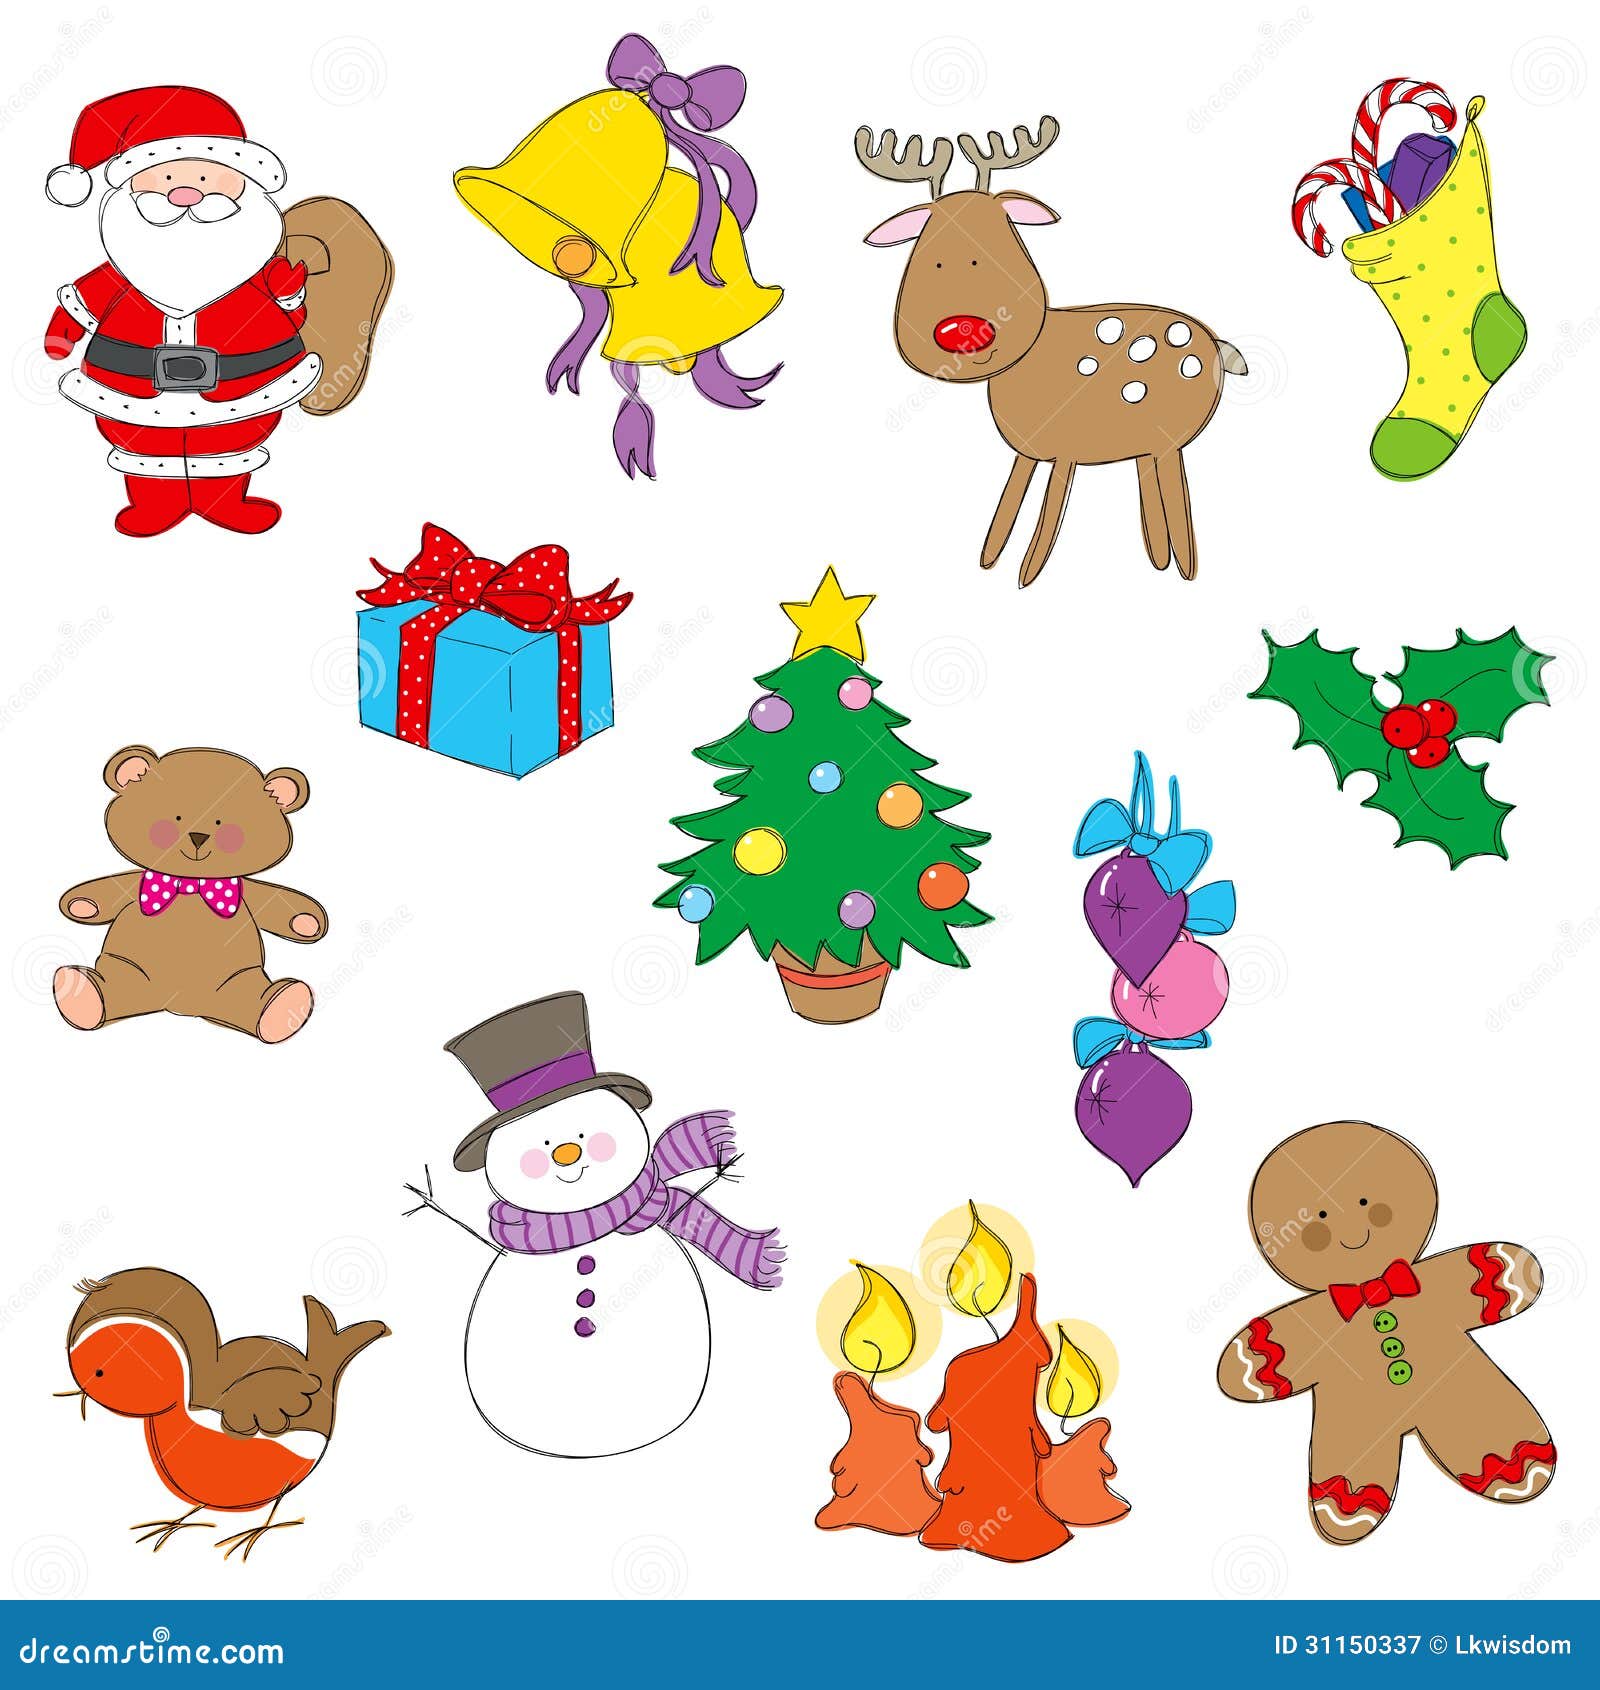 dover clipart free download - photo #34